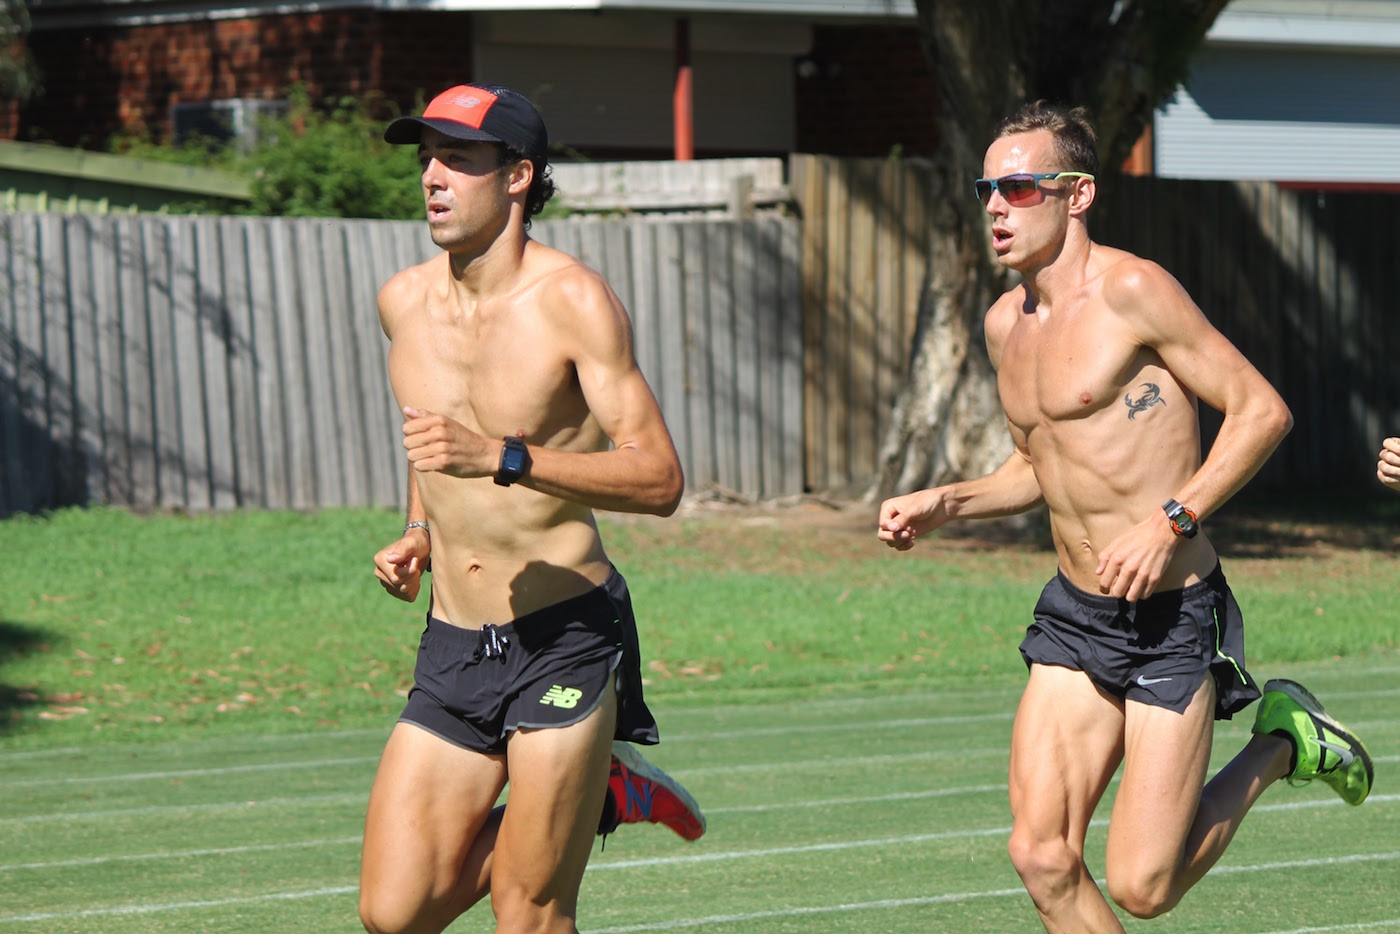 Luke Mathews and Ryan Gregson working hard at MTC training session in Melbourne earlier this year: Photo by RT